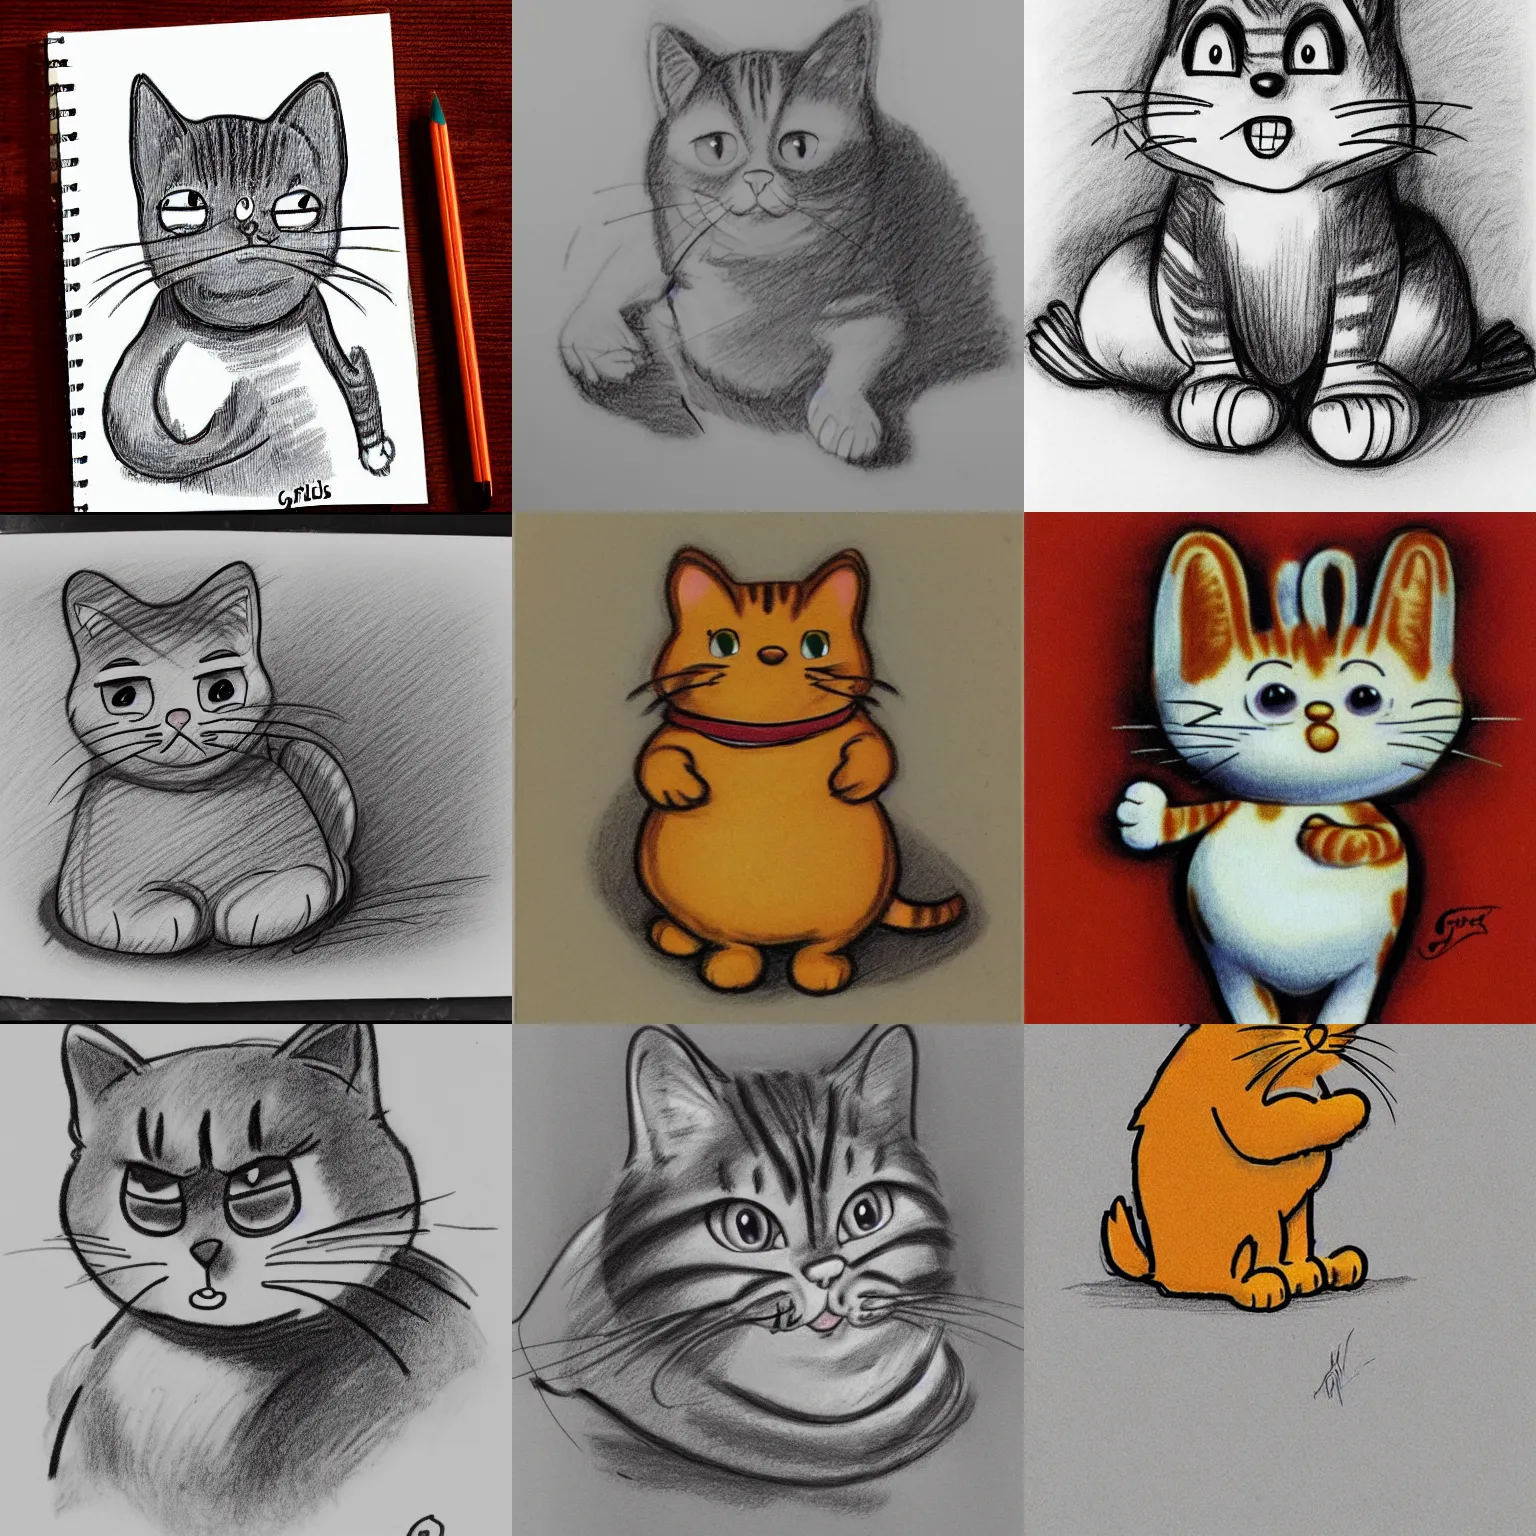 Prompt: Garfield the Cat, pencil sketch, illustrated by Jim Davis